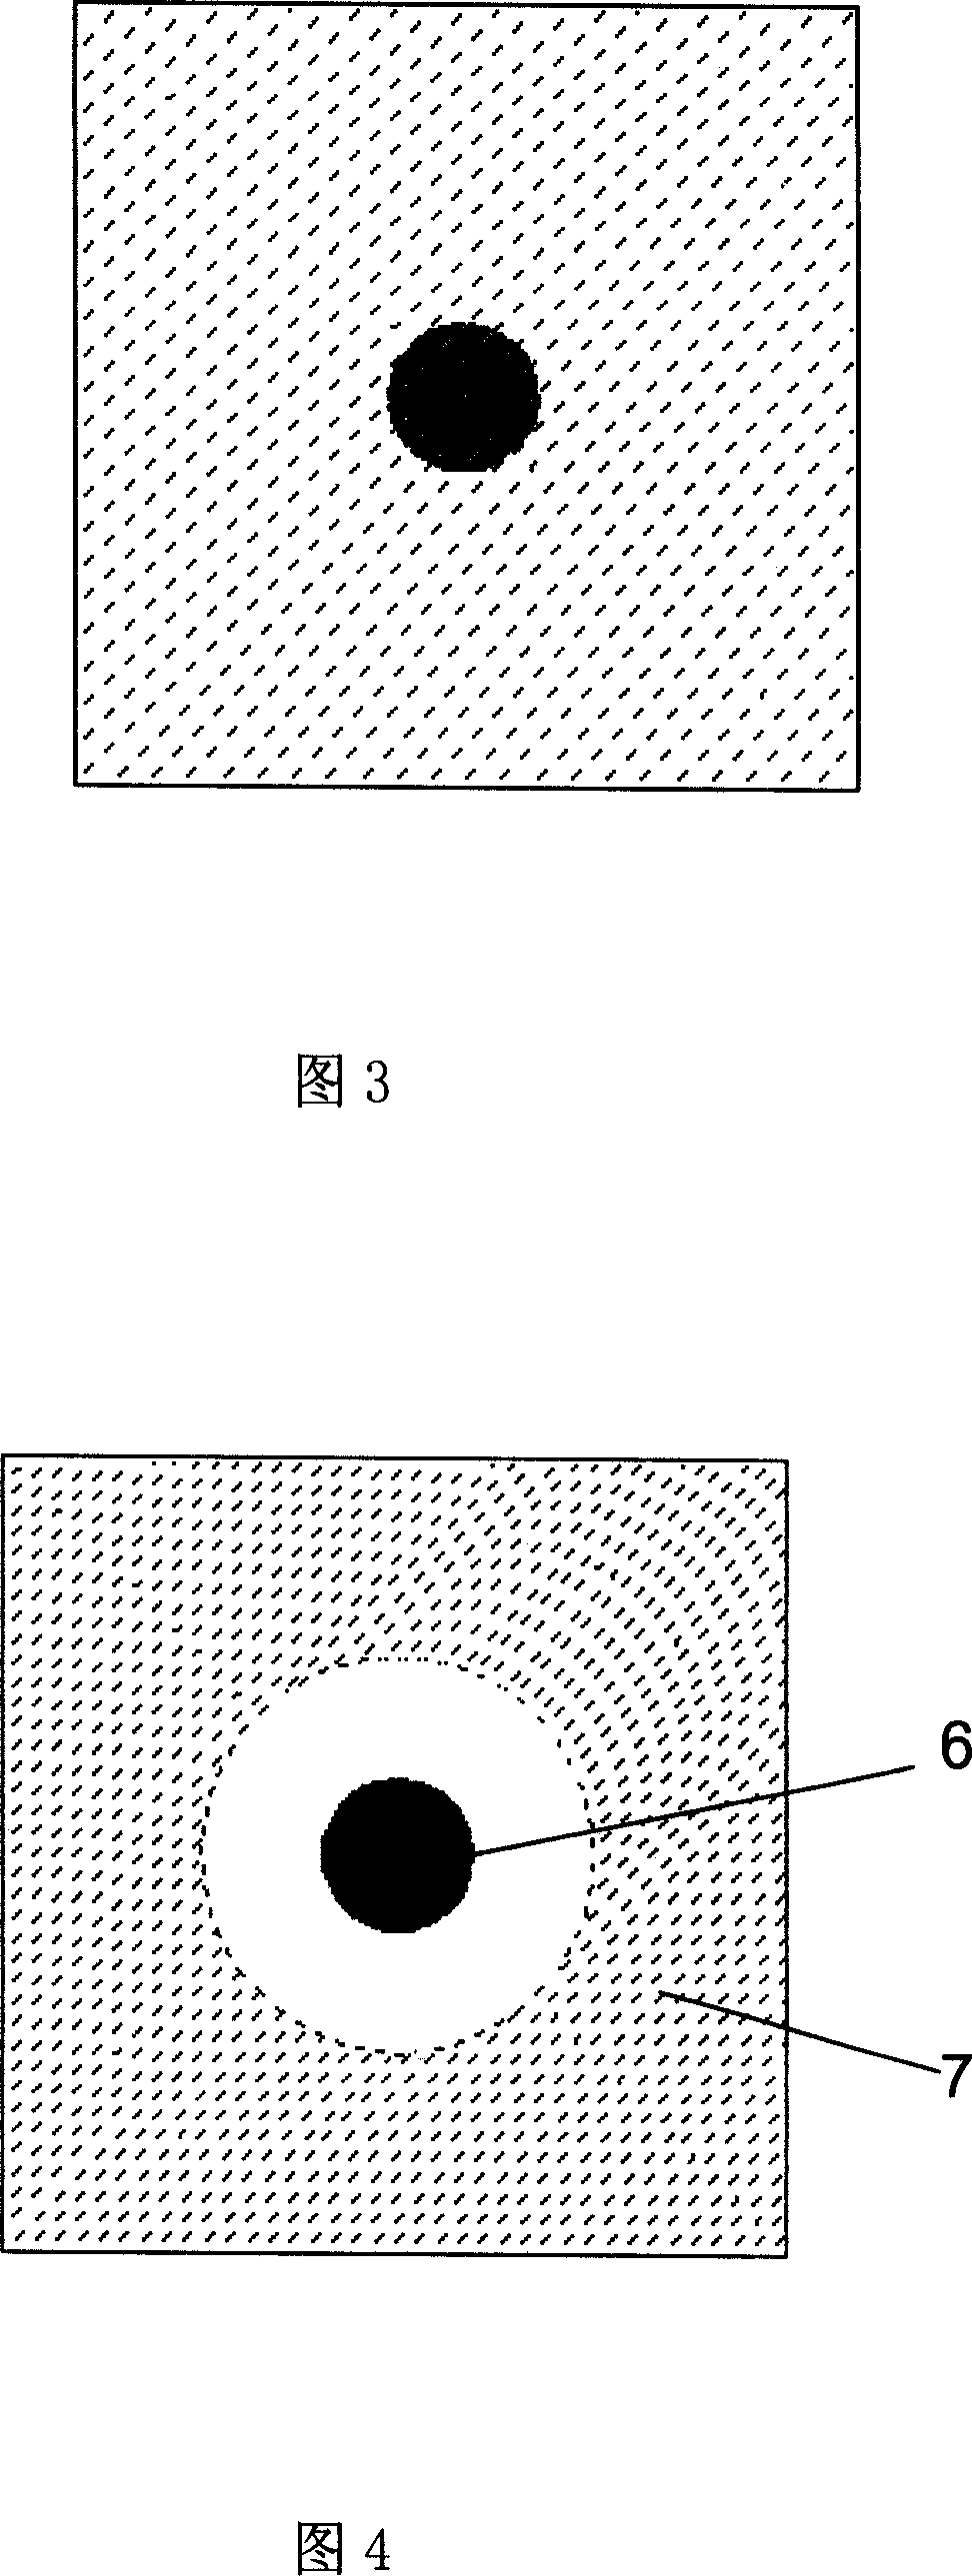 Optical identifying welding plate for printed circuit board and mfg. method